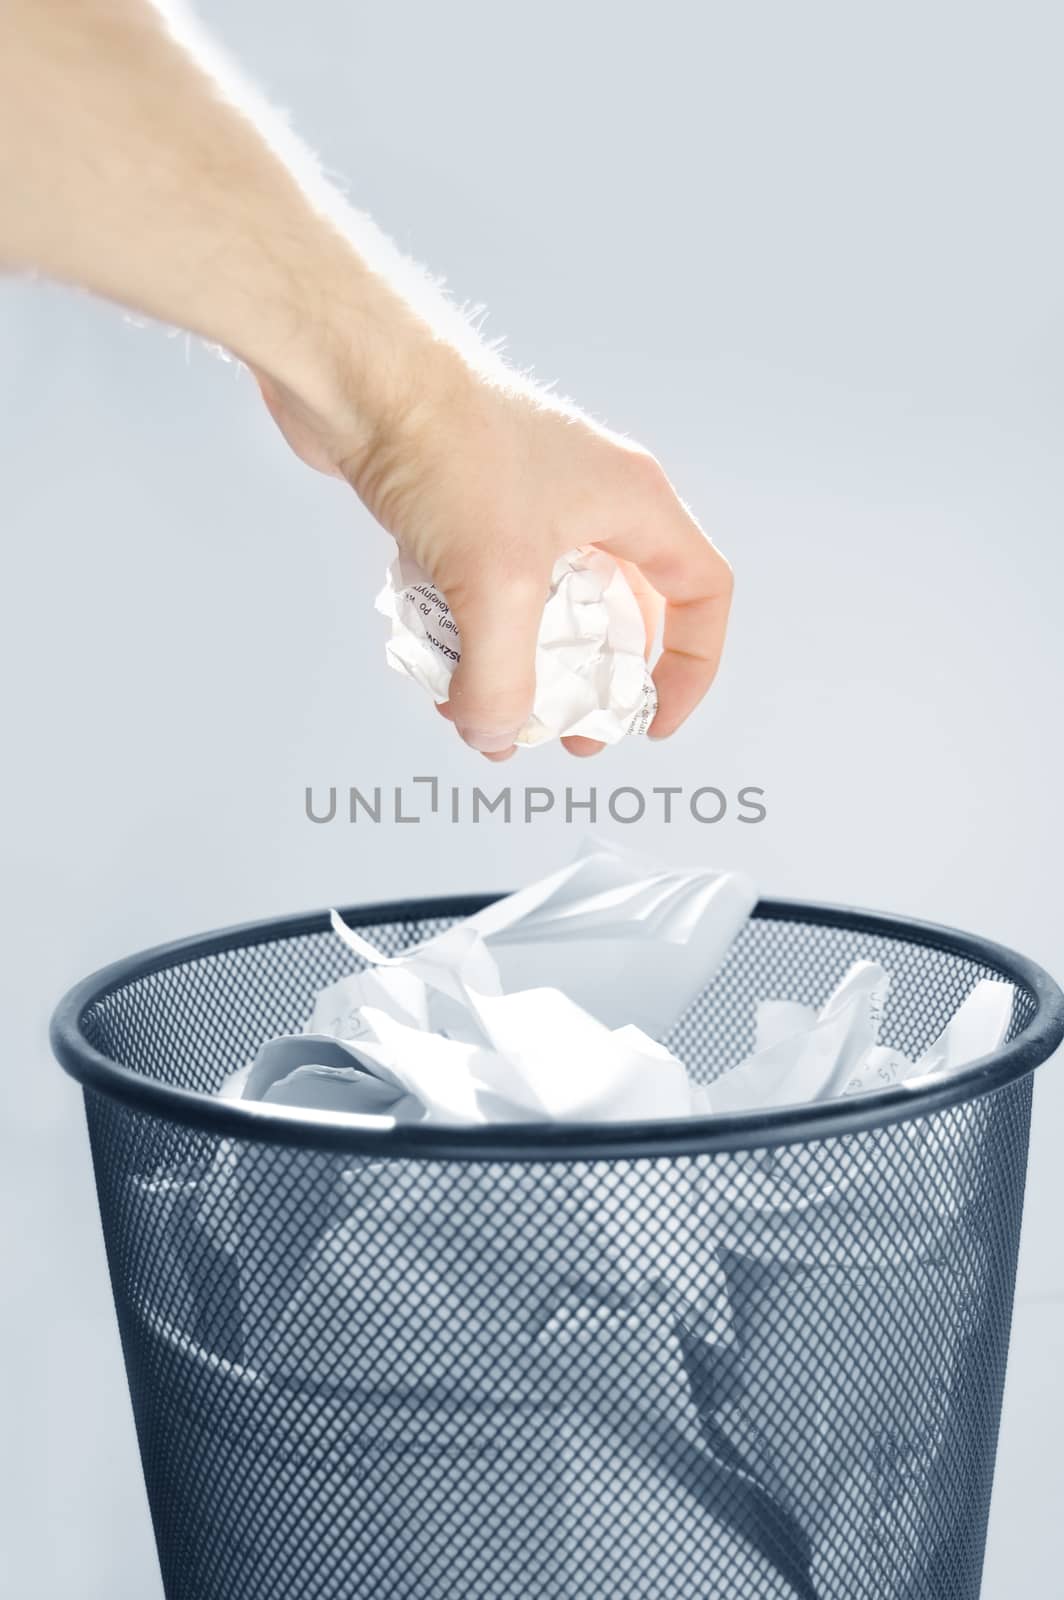 Garbage conceptual image. Man throws paper into a full garbage.